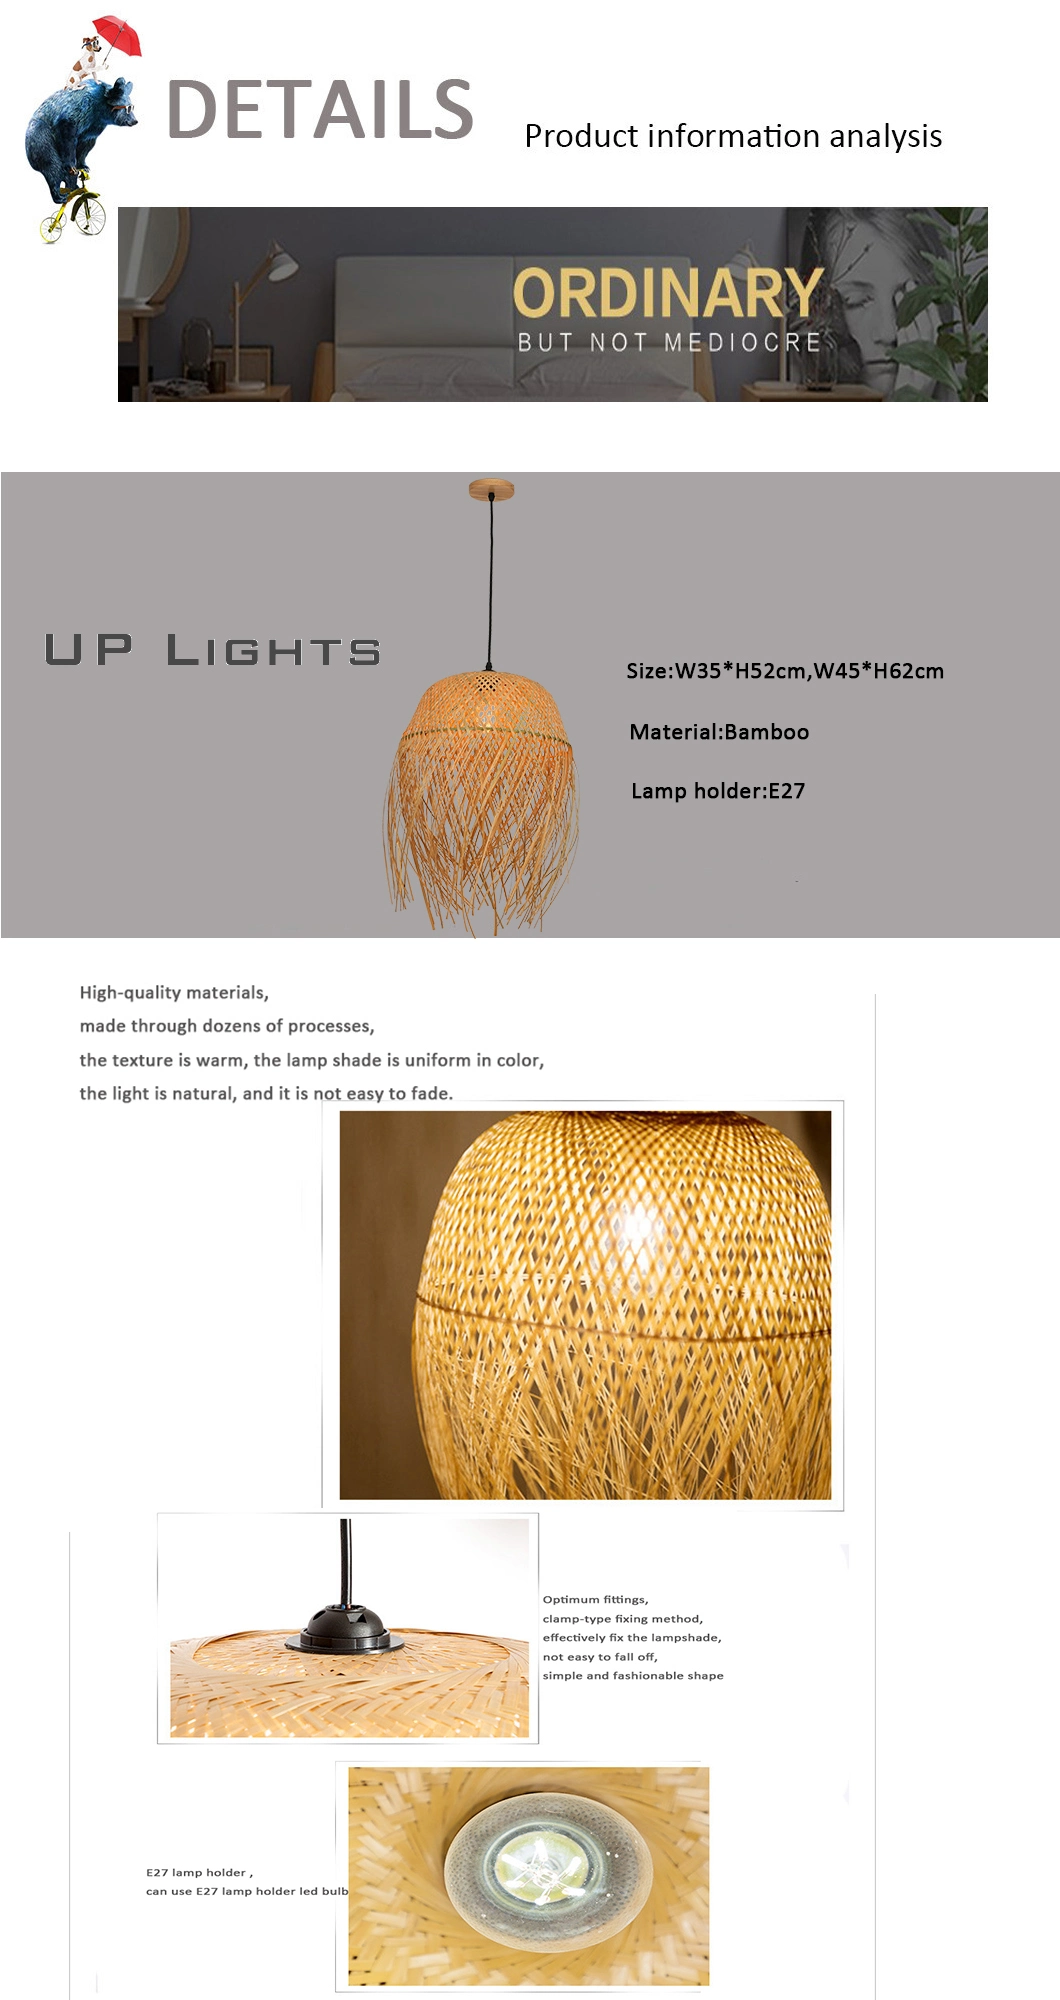 Indonesia Rattan Sea Grass Lamp Shade Bamboo Cage Wicker Weaving Ceiling Chandelier Pendant Lighting From Zhongshan Factory